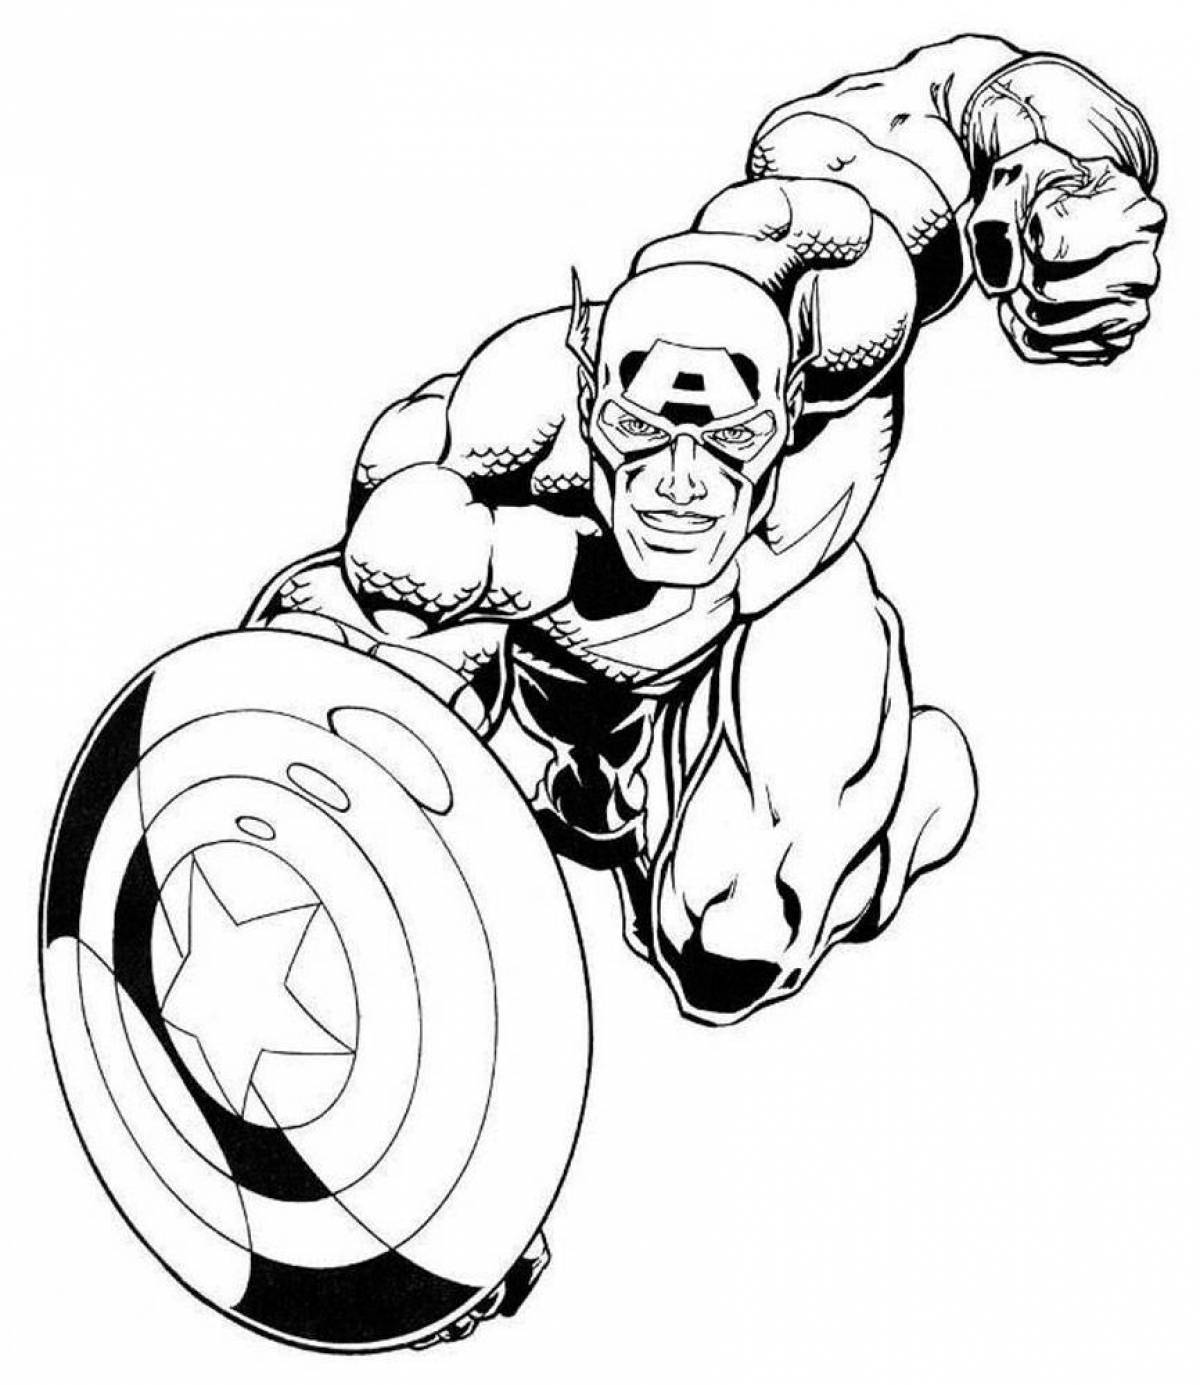 Charming captain america coloring page